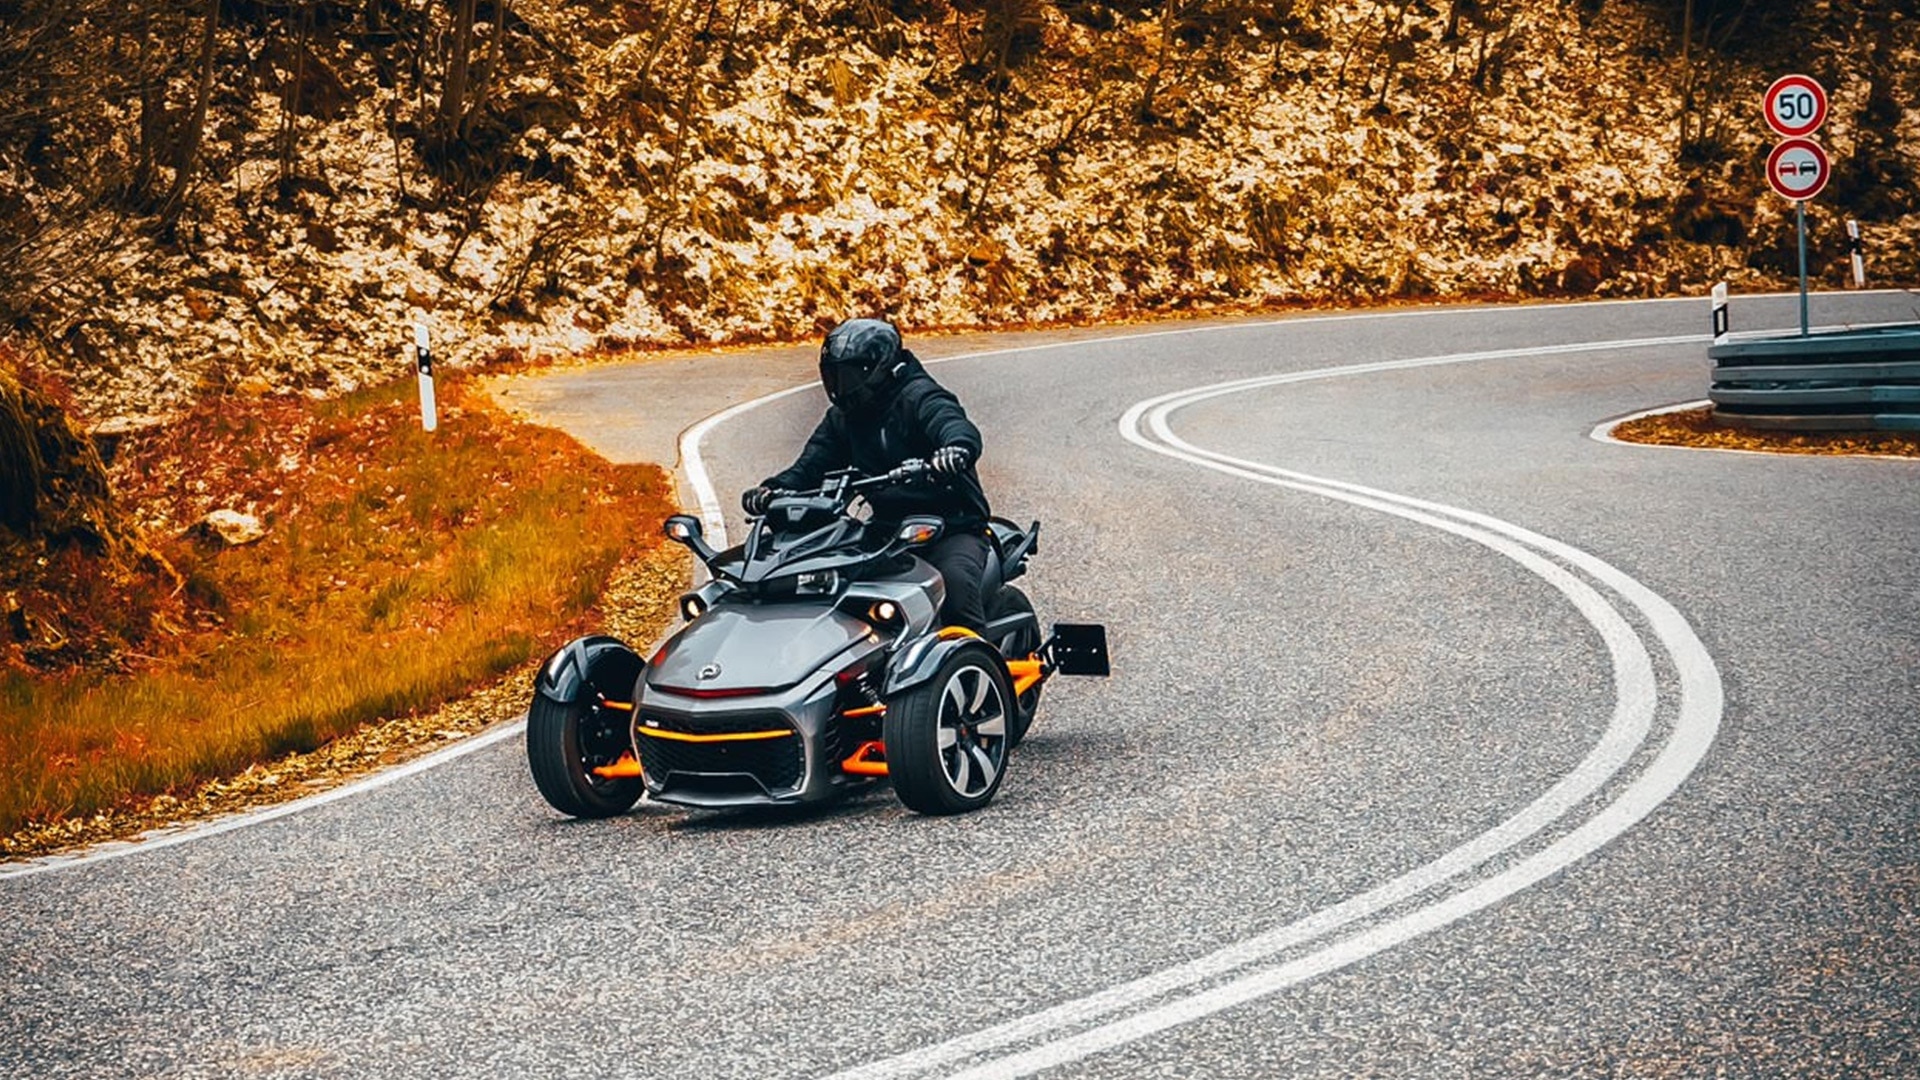 Rider on Can-Am Spyder on mountain road